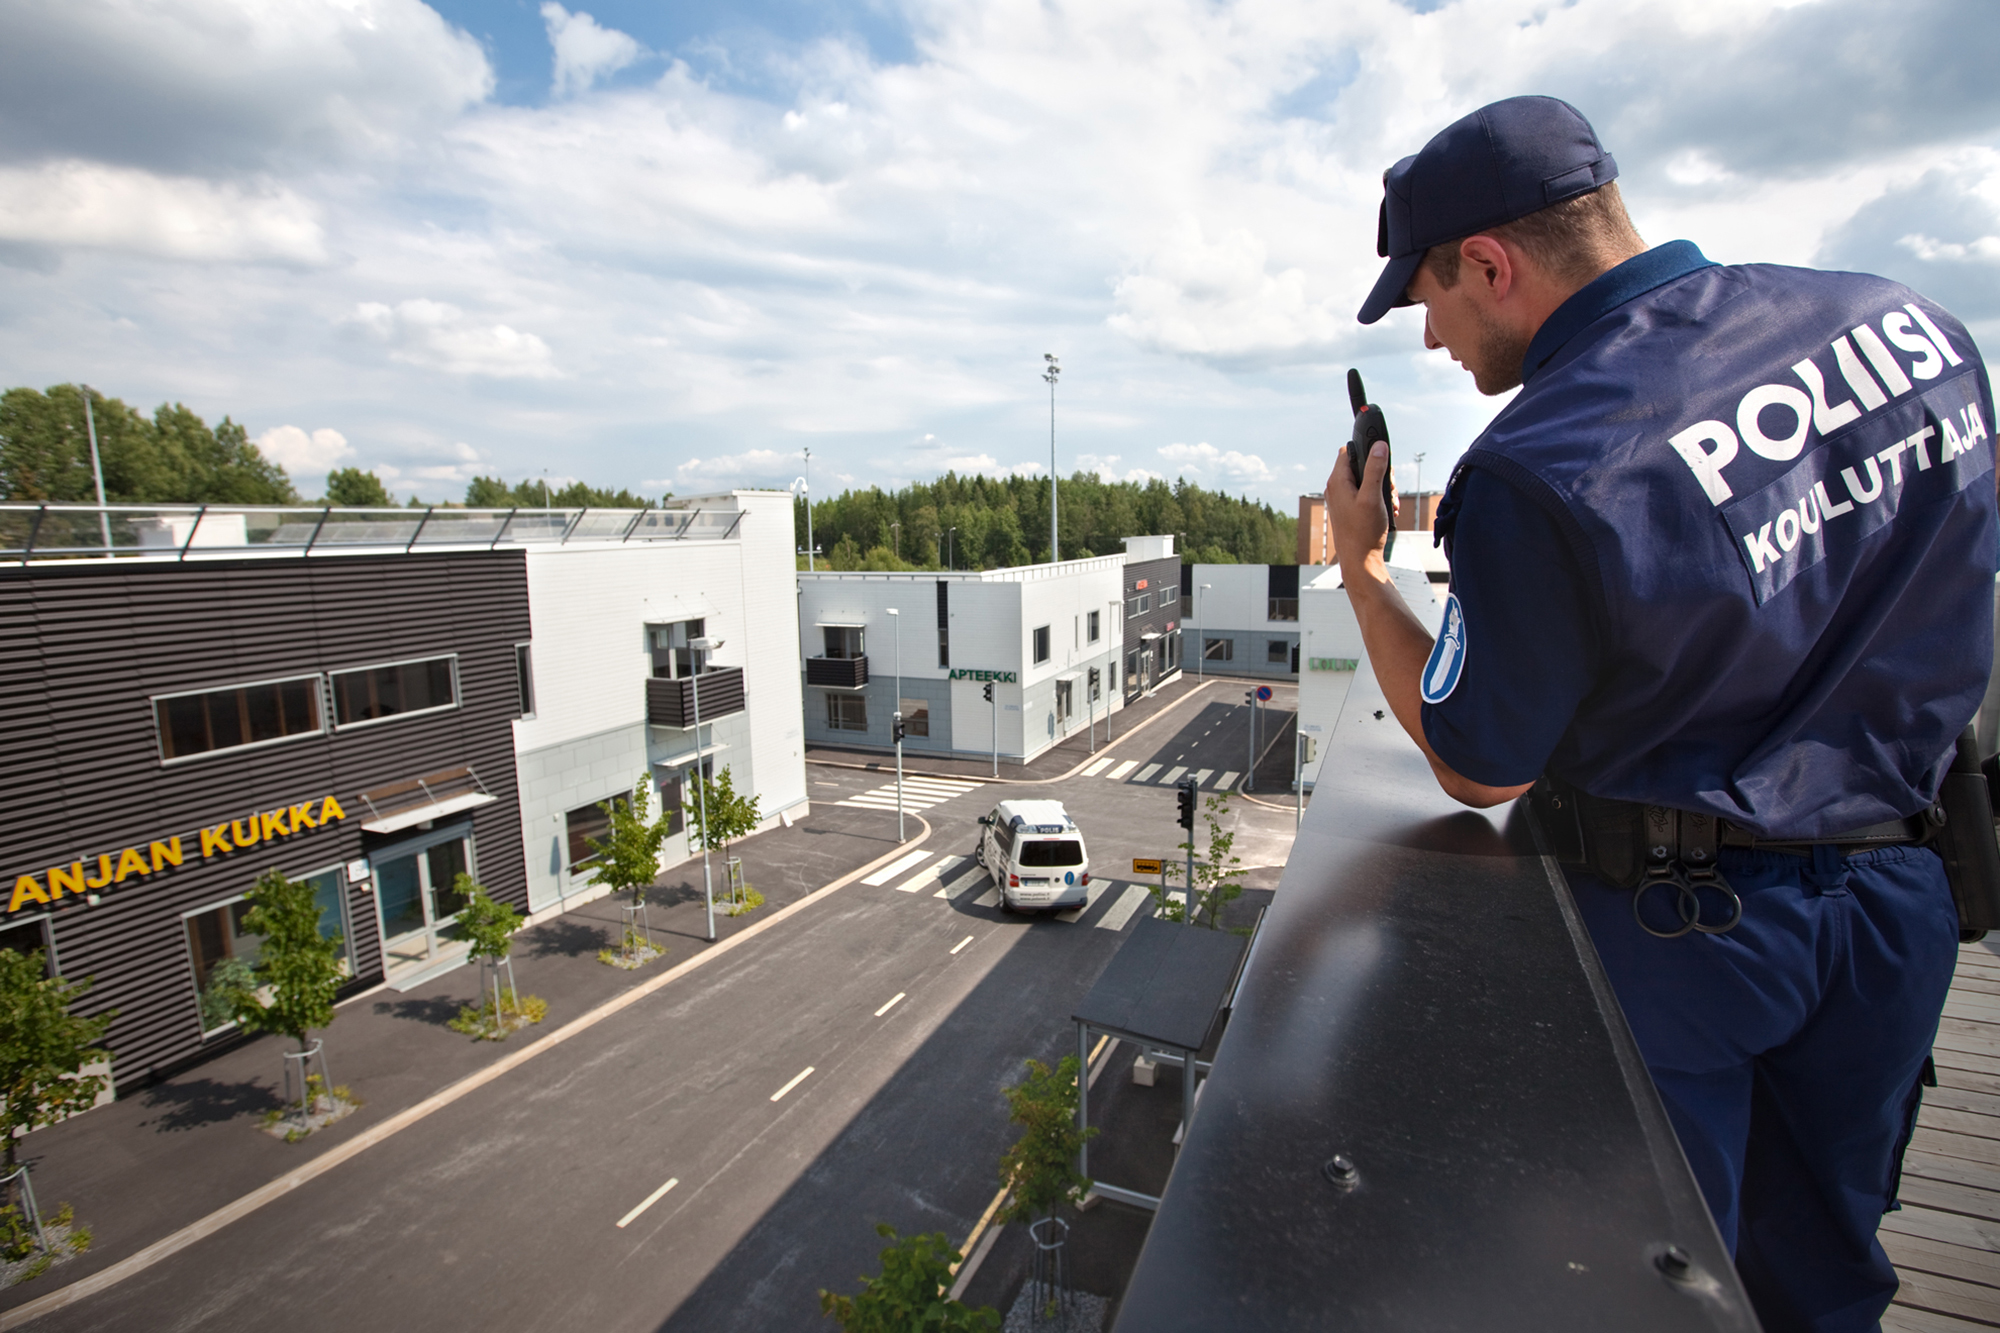 A police instructor watching what is happening in the Police University College training area from an observation area built on a rooftop area.